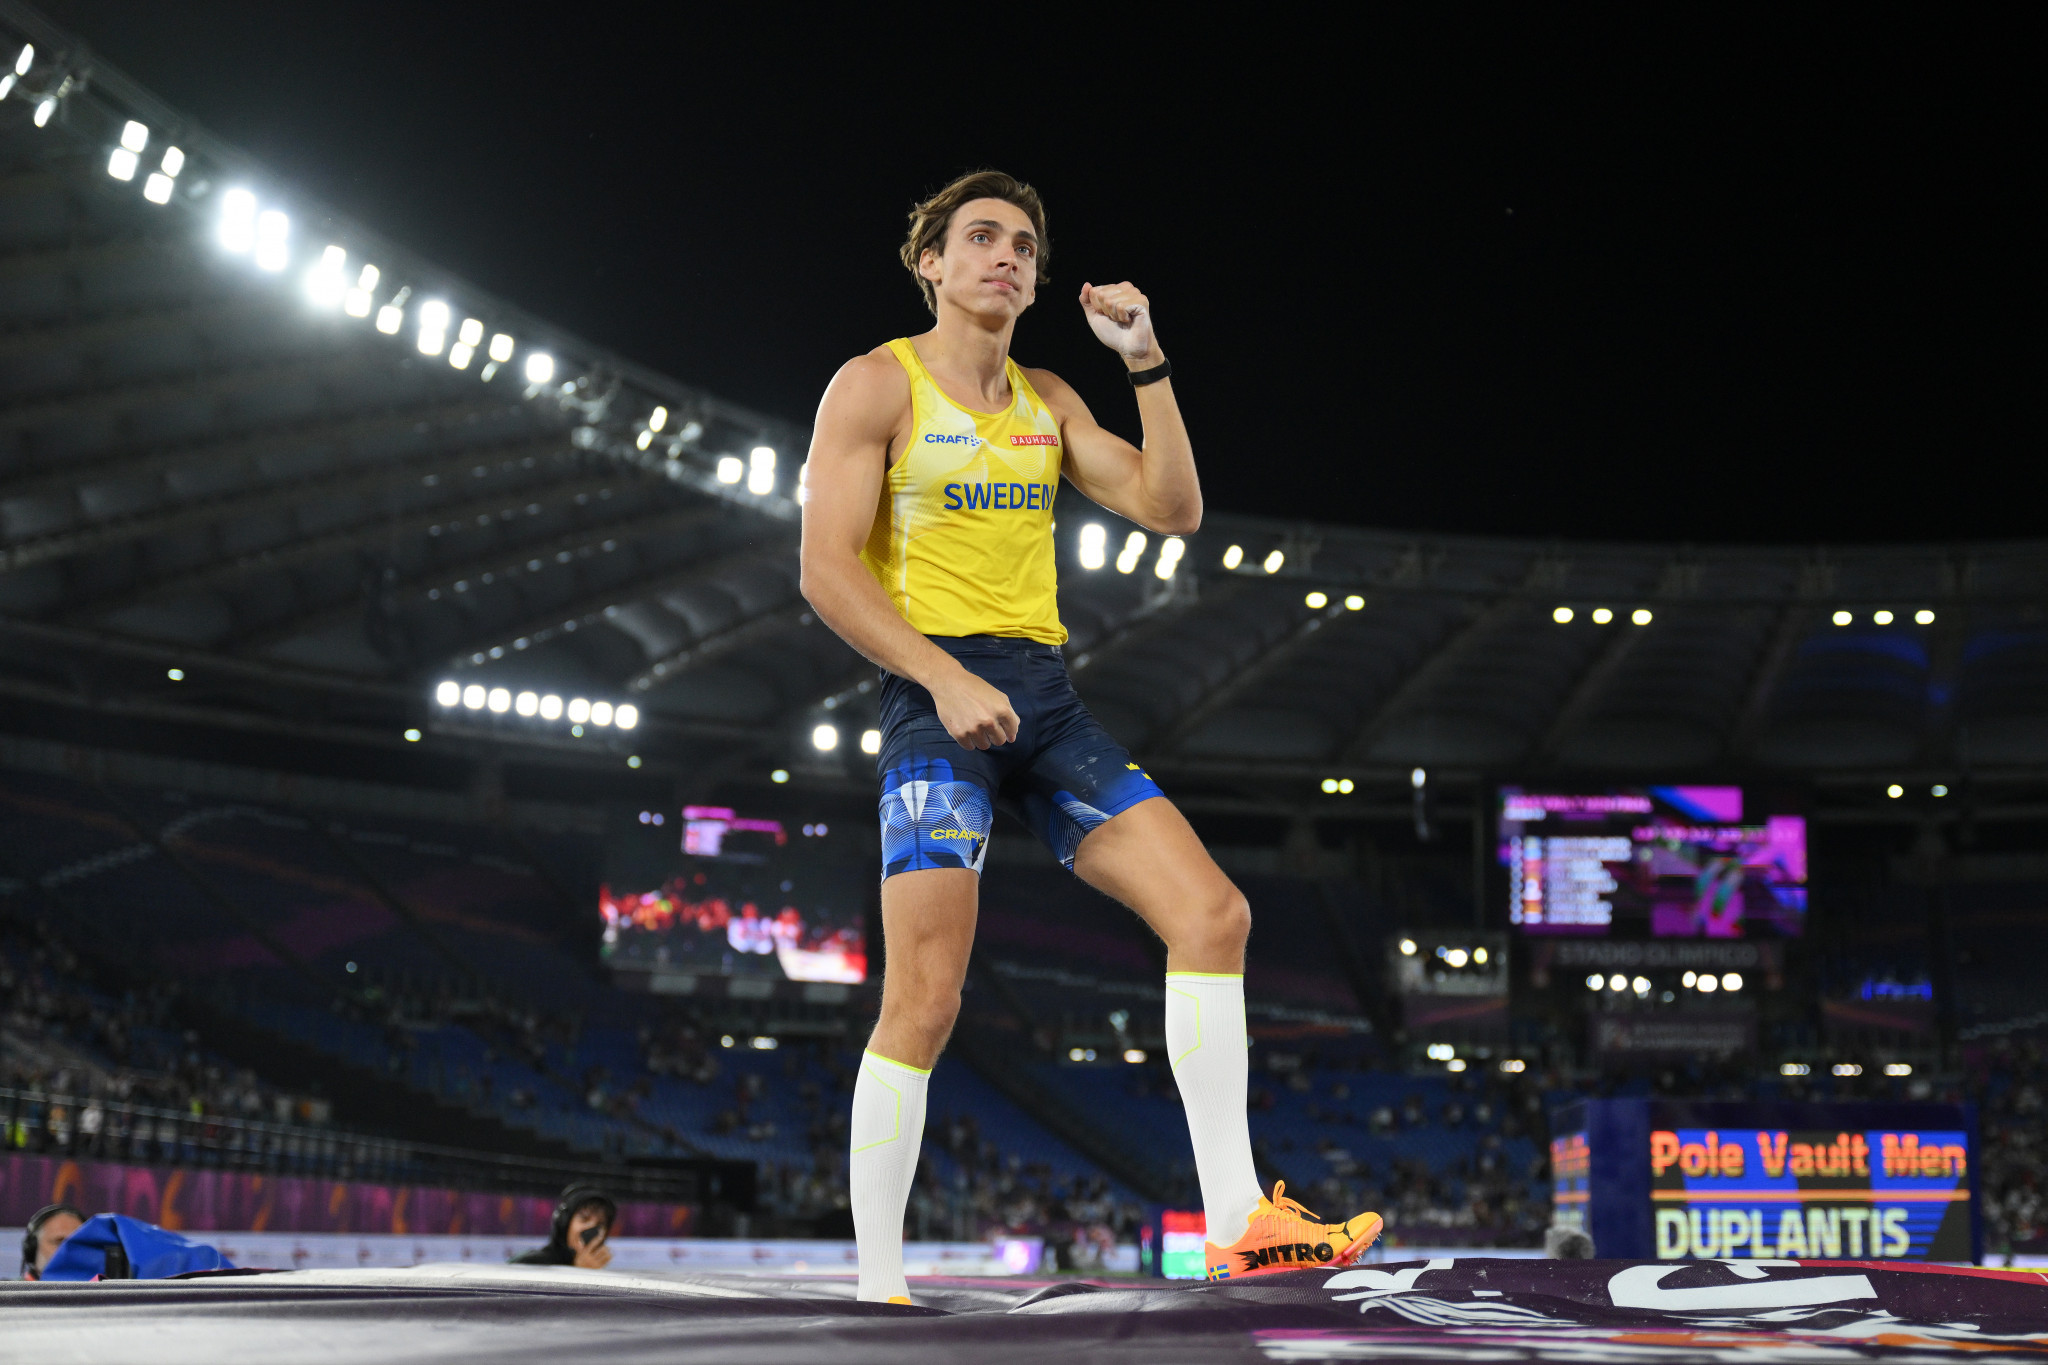 Men's pole vault star Mondo Duplantis is expected to shine for Sweden in the French capital. GETTY IMAGES